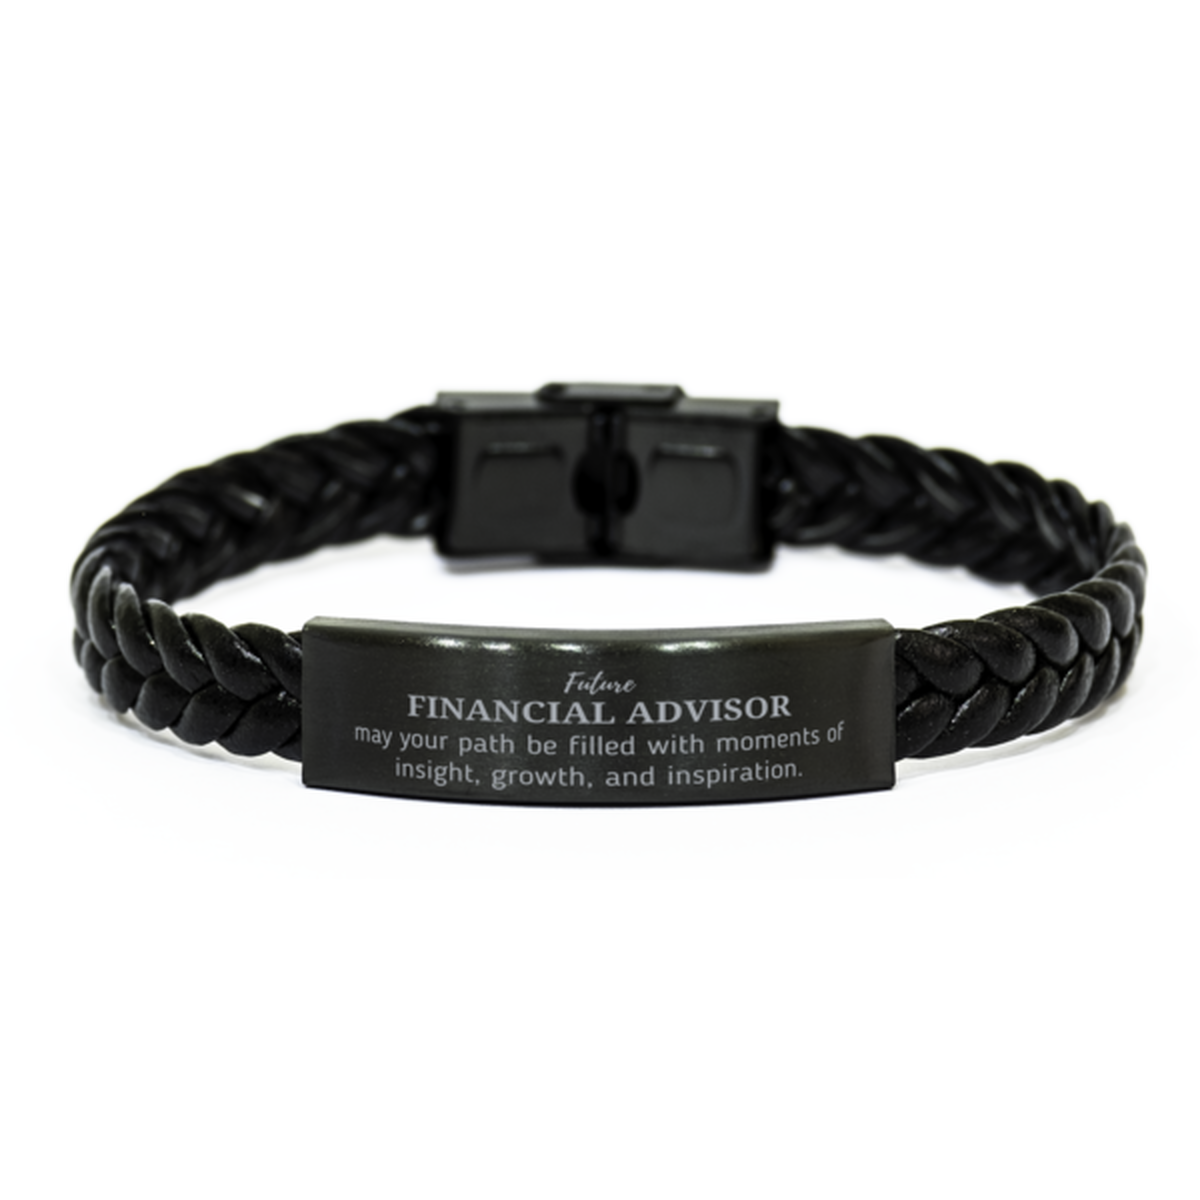 Future Financial Advisor Gifts, May your path be filled with moments of insight, Graduation Gifts for New Financial Advisor, Christmas Unique Braided Leather Bracelet For Men, Women, Friends